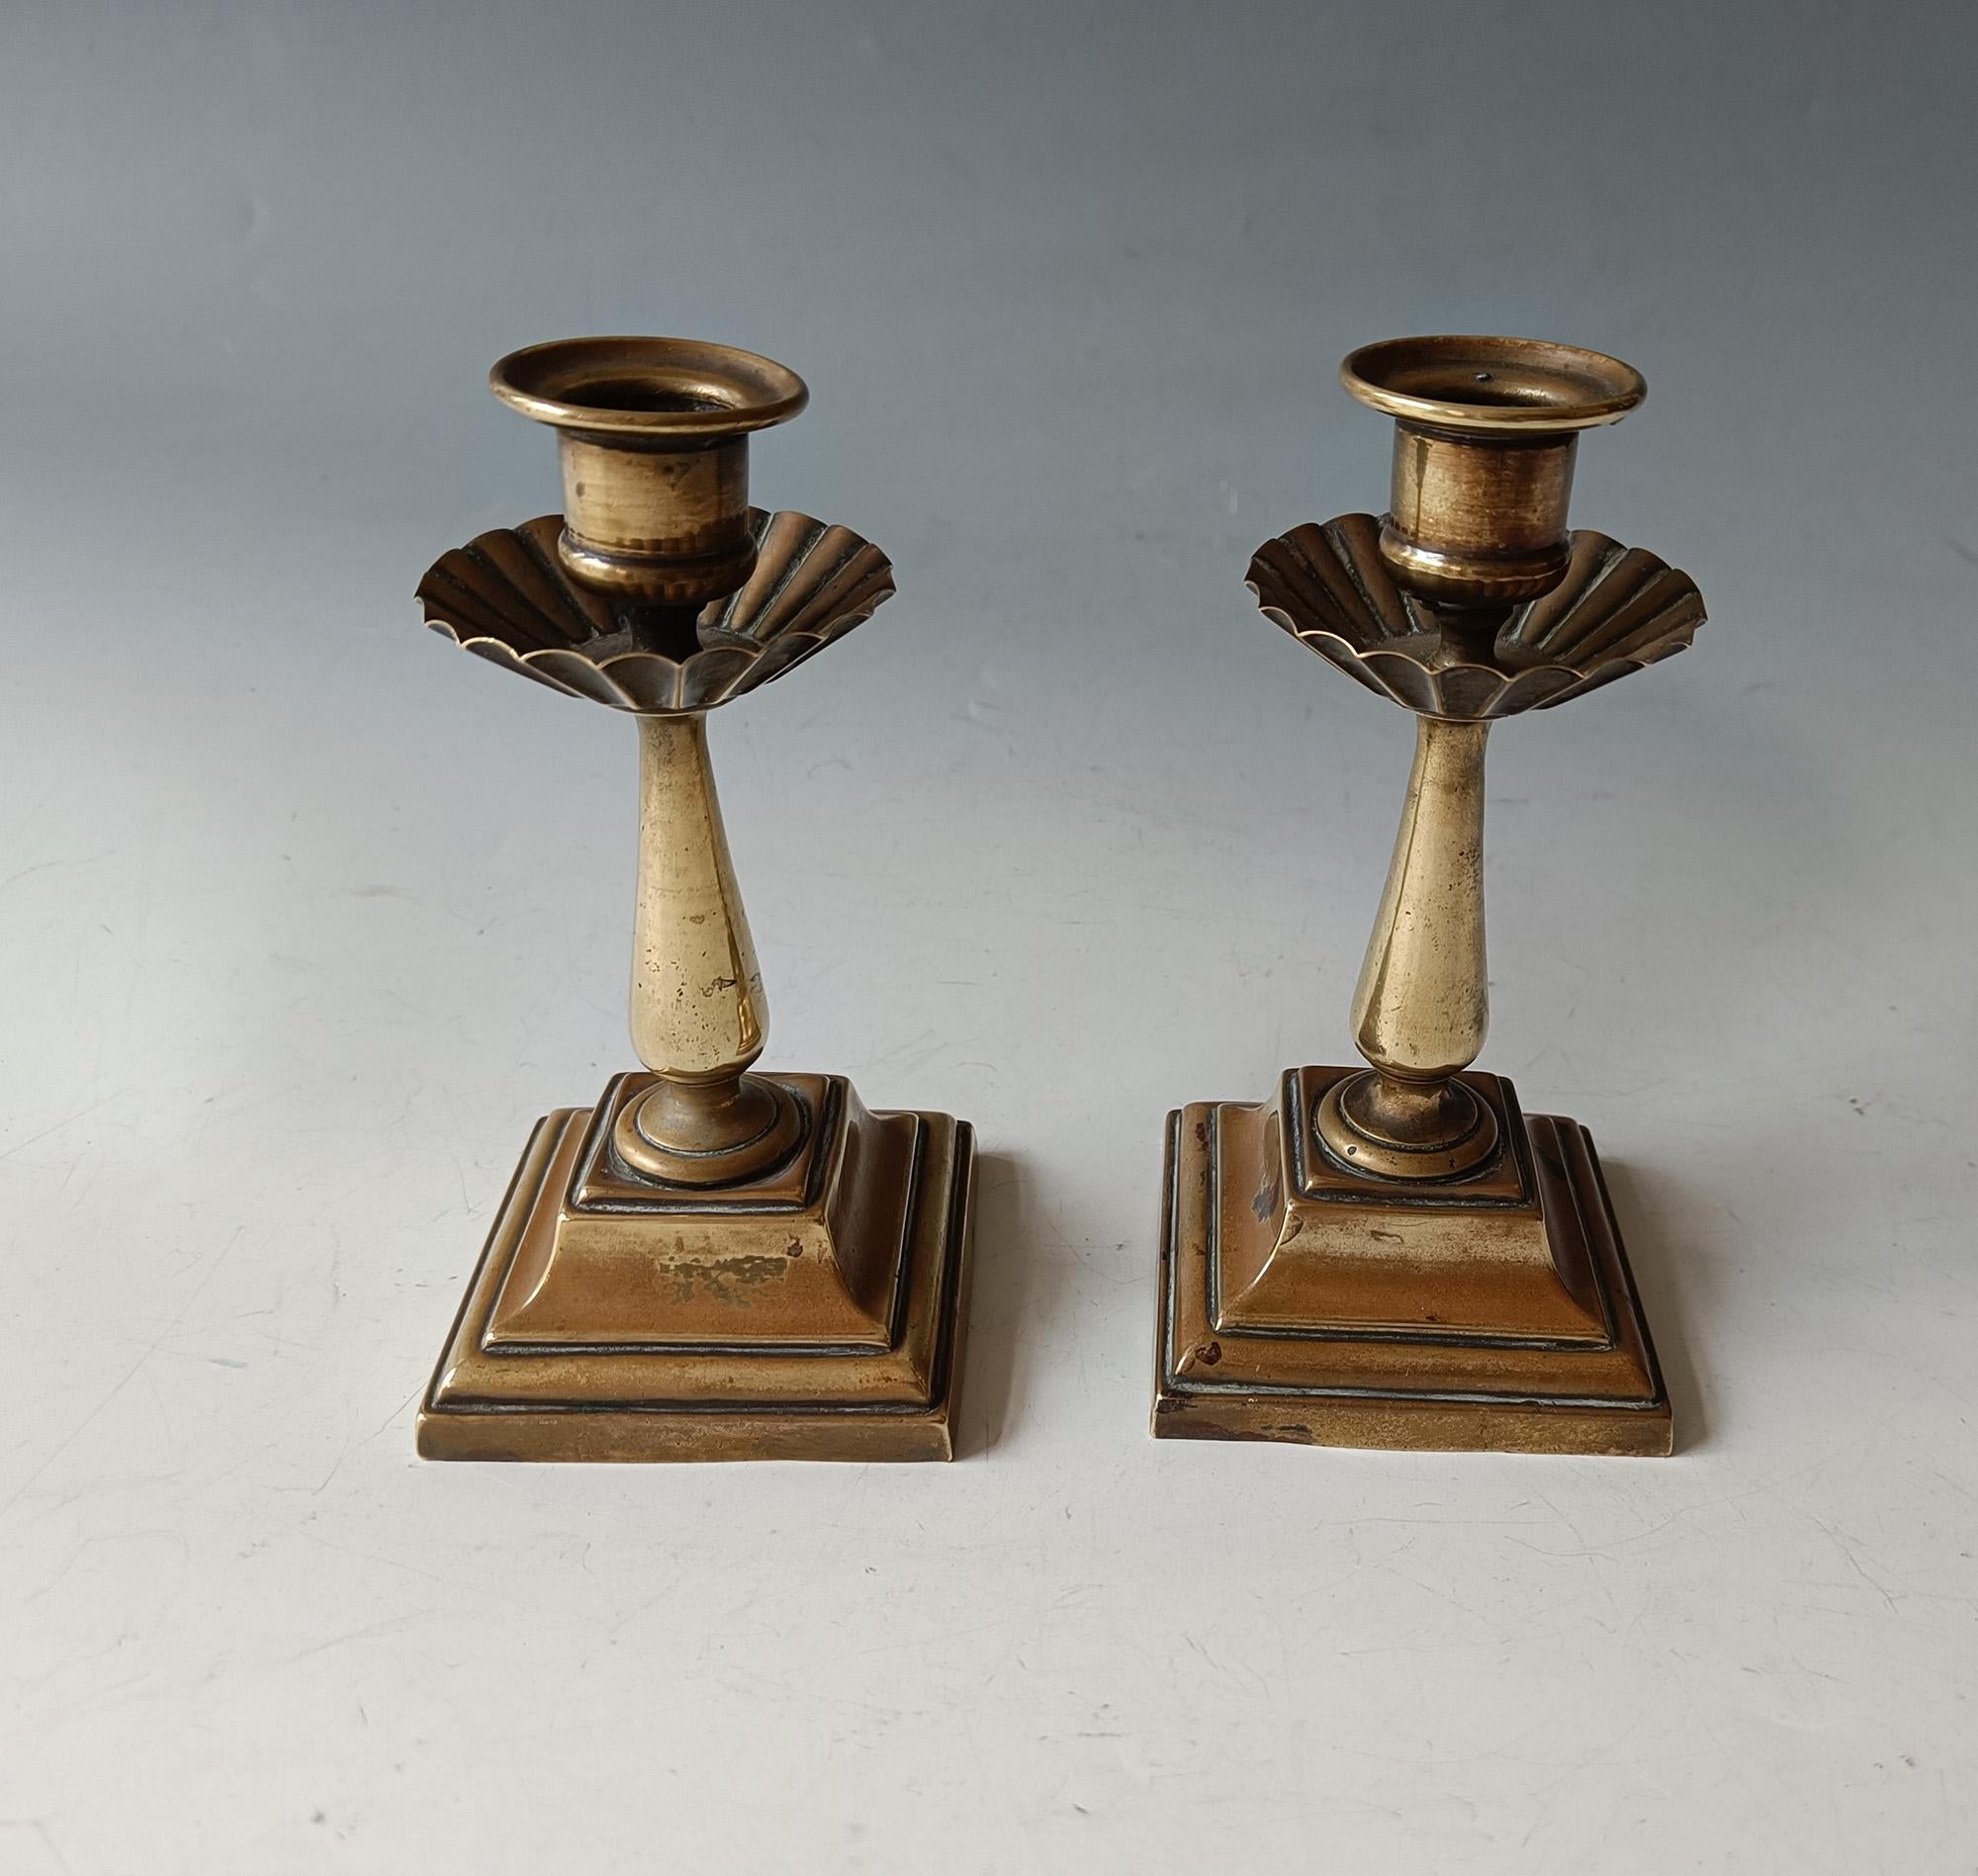 Antique English Georgian Brass Candle stick holders

A elegant English Georgian small size with waisted detail

Nice aged patina 

very good condition,

Measures: height 26 cm.